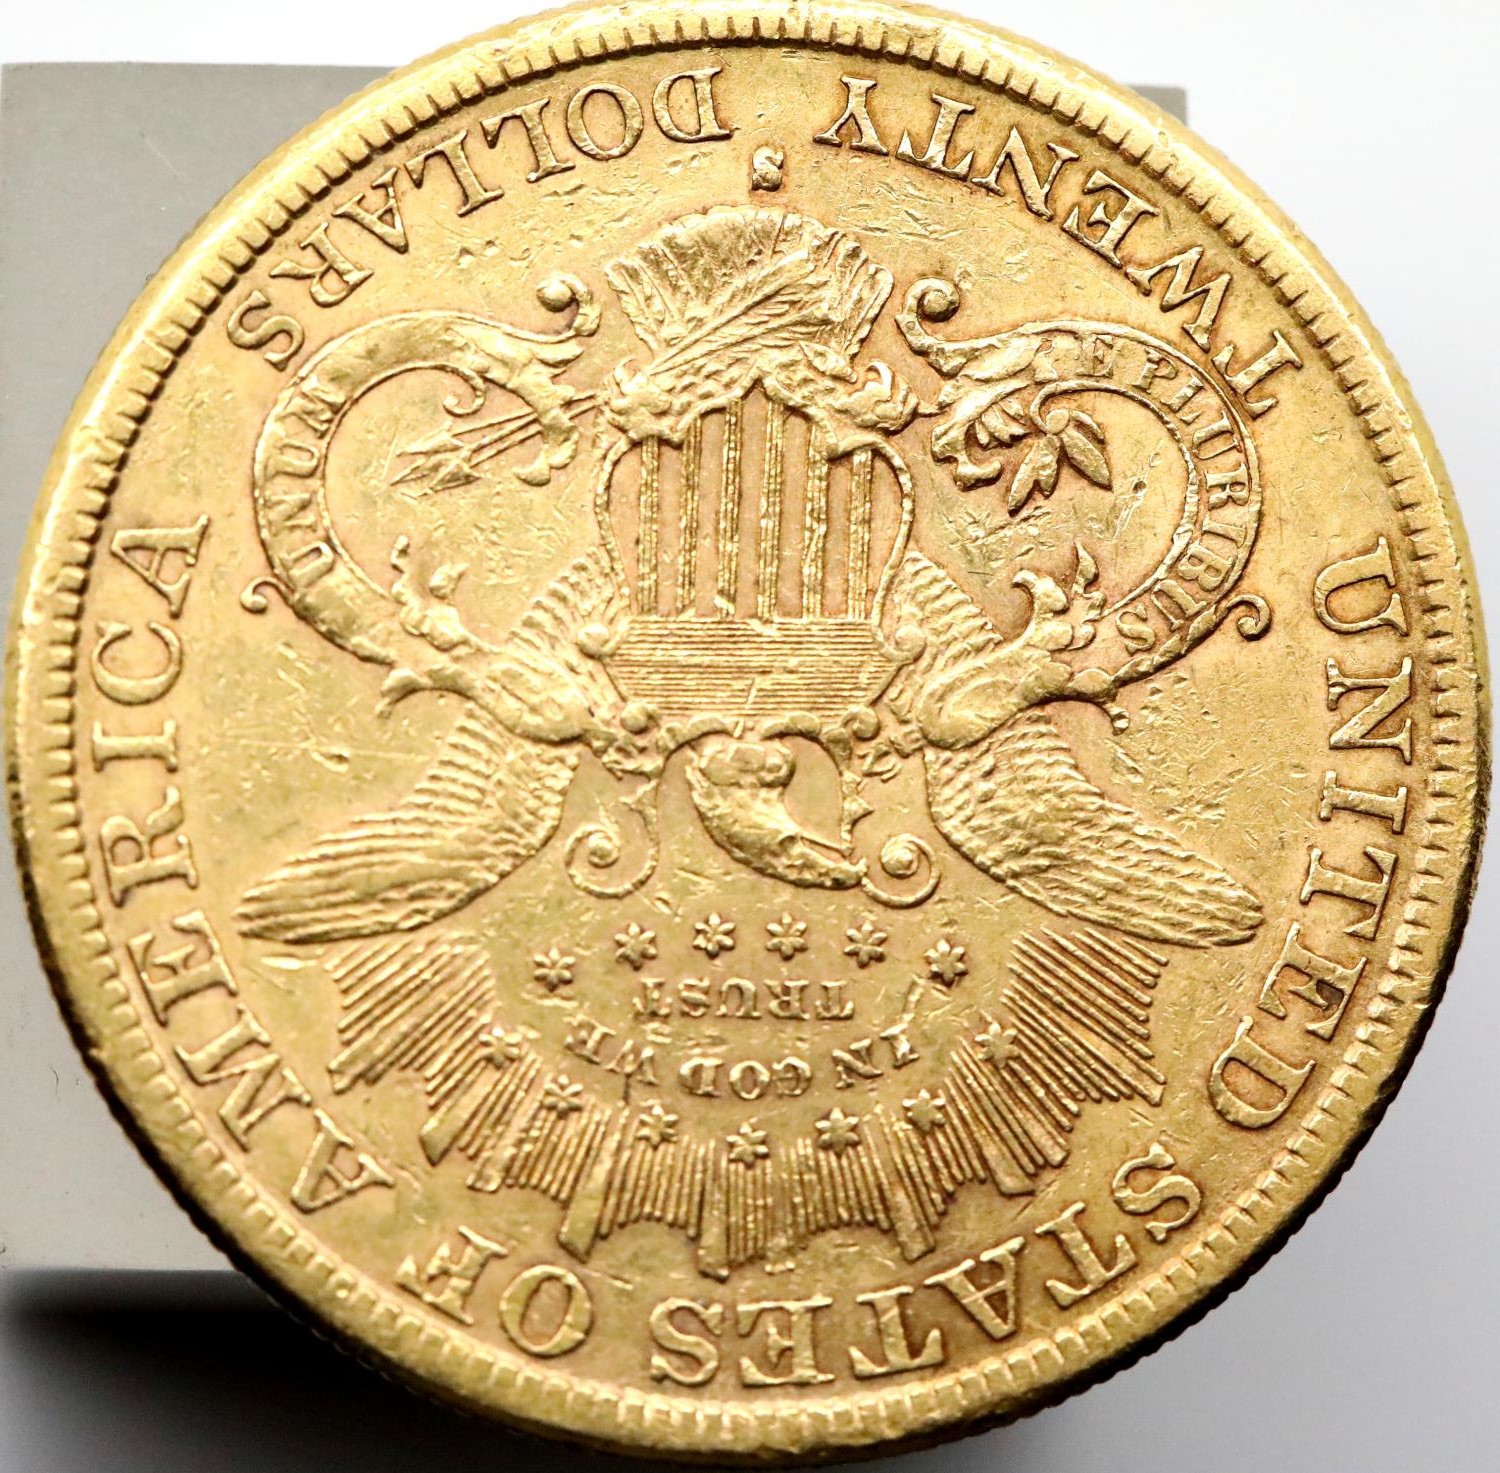 American 1880 Gold San Francisco mint 20 Dollar coin with fine definition. P&P Group 2 (£18+VAT - Image 2 of 2